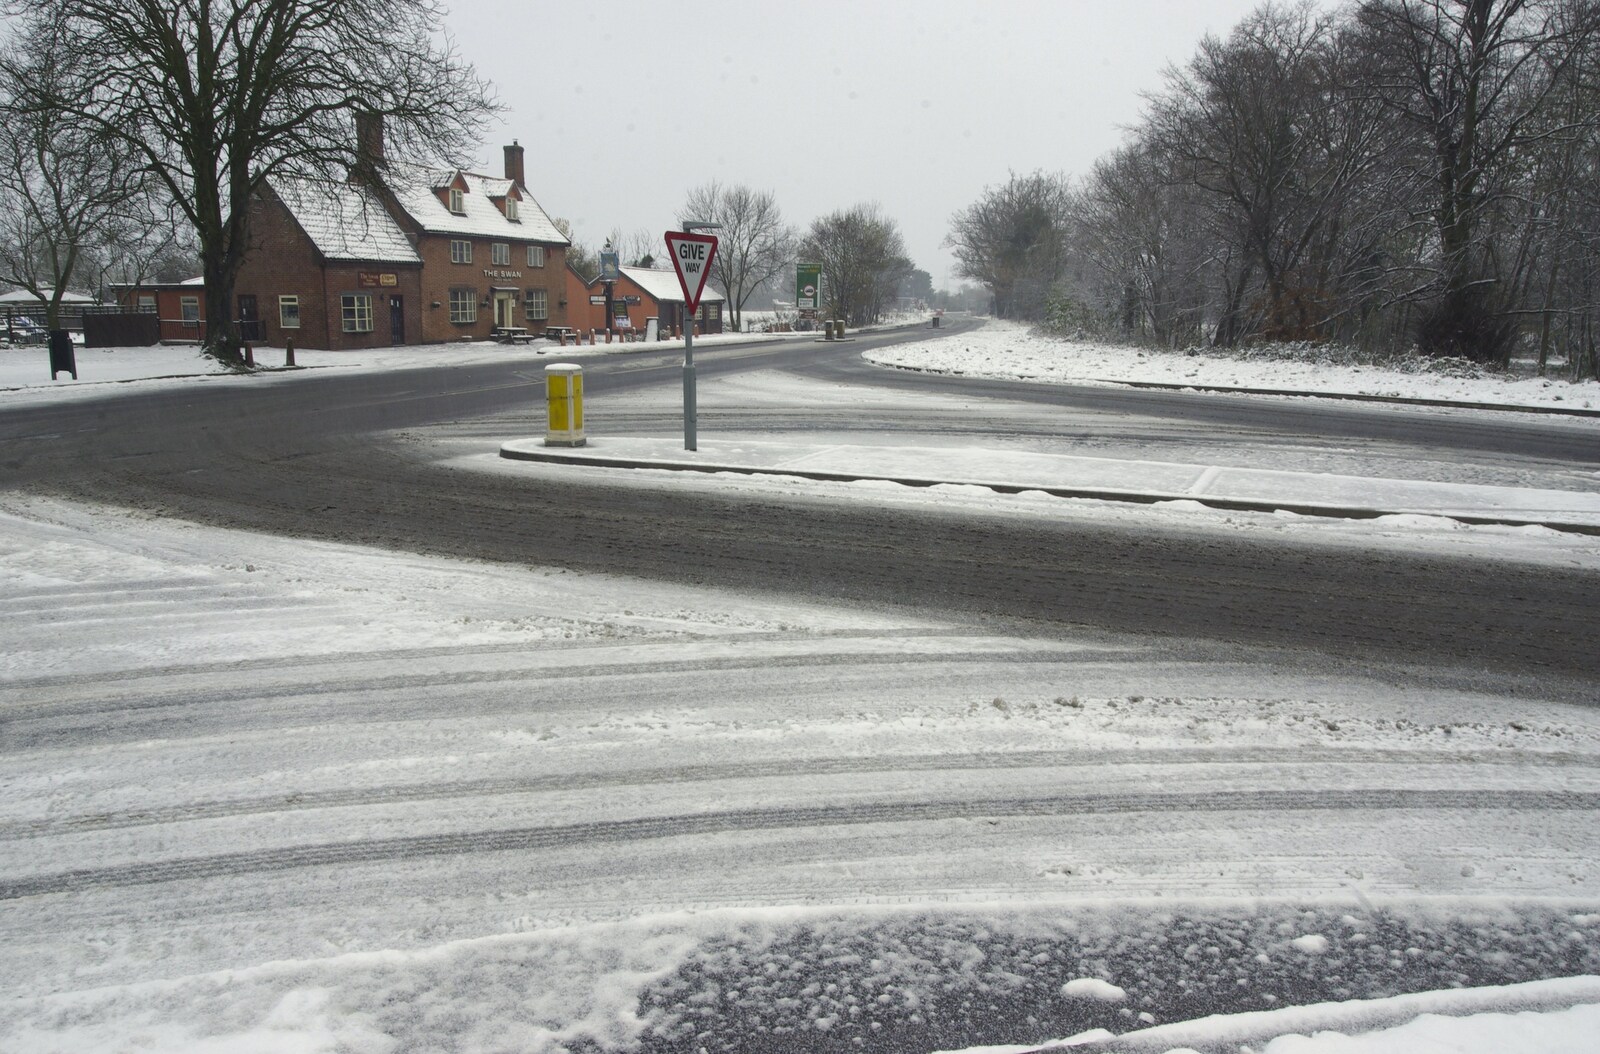 The junction to Eye and the B1077 from Snow Days, Brome, Suffolk - 22nd November 2008